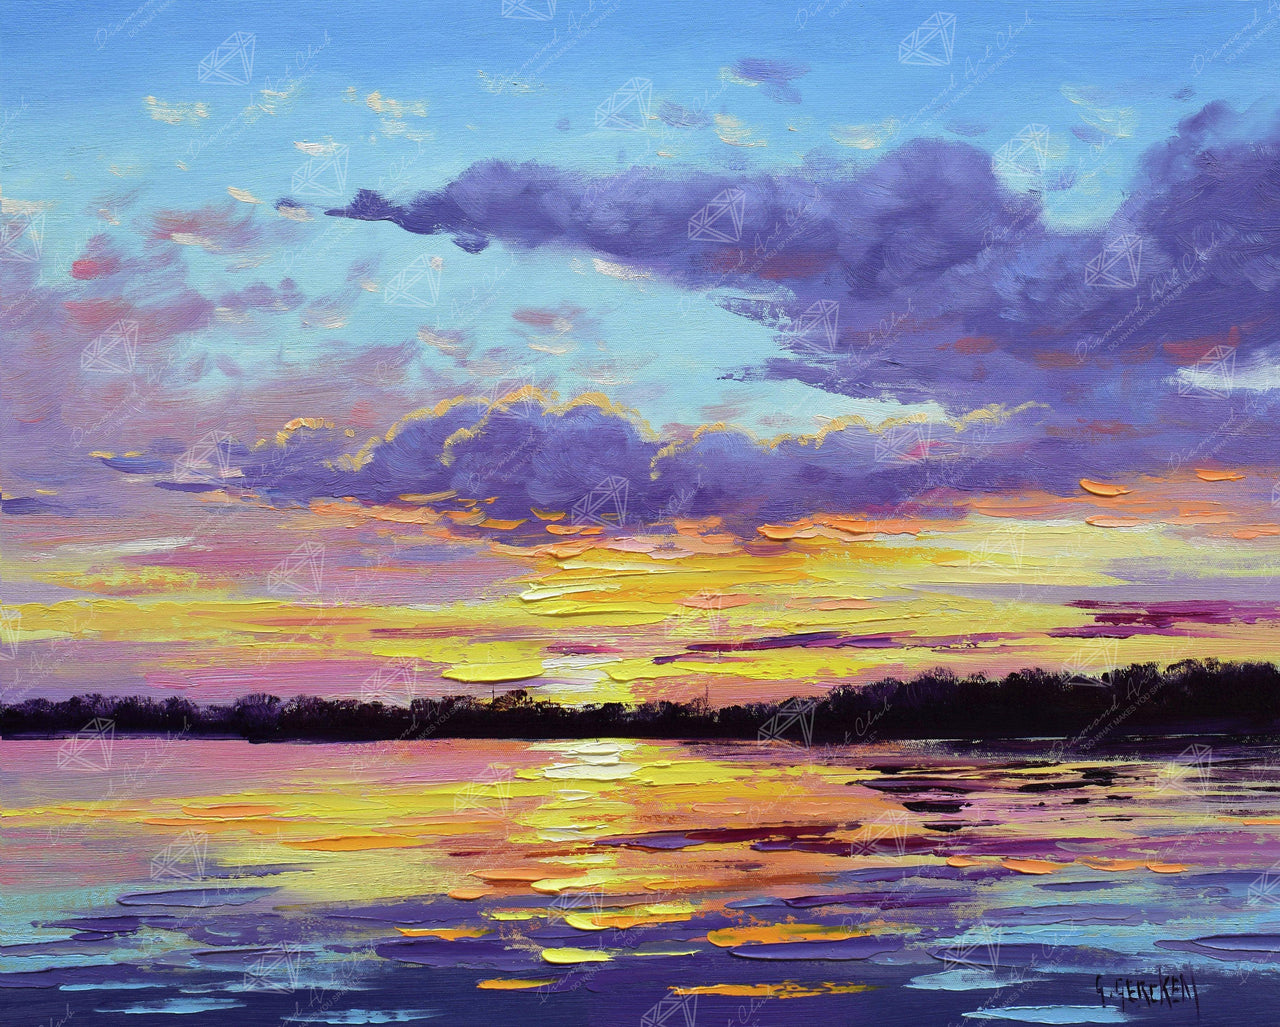 Diamond Painting Sunset Reflections 12.6" x 15.7" (32cm x 40cm) / Square with 38 Colors / 61,560